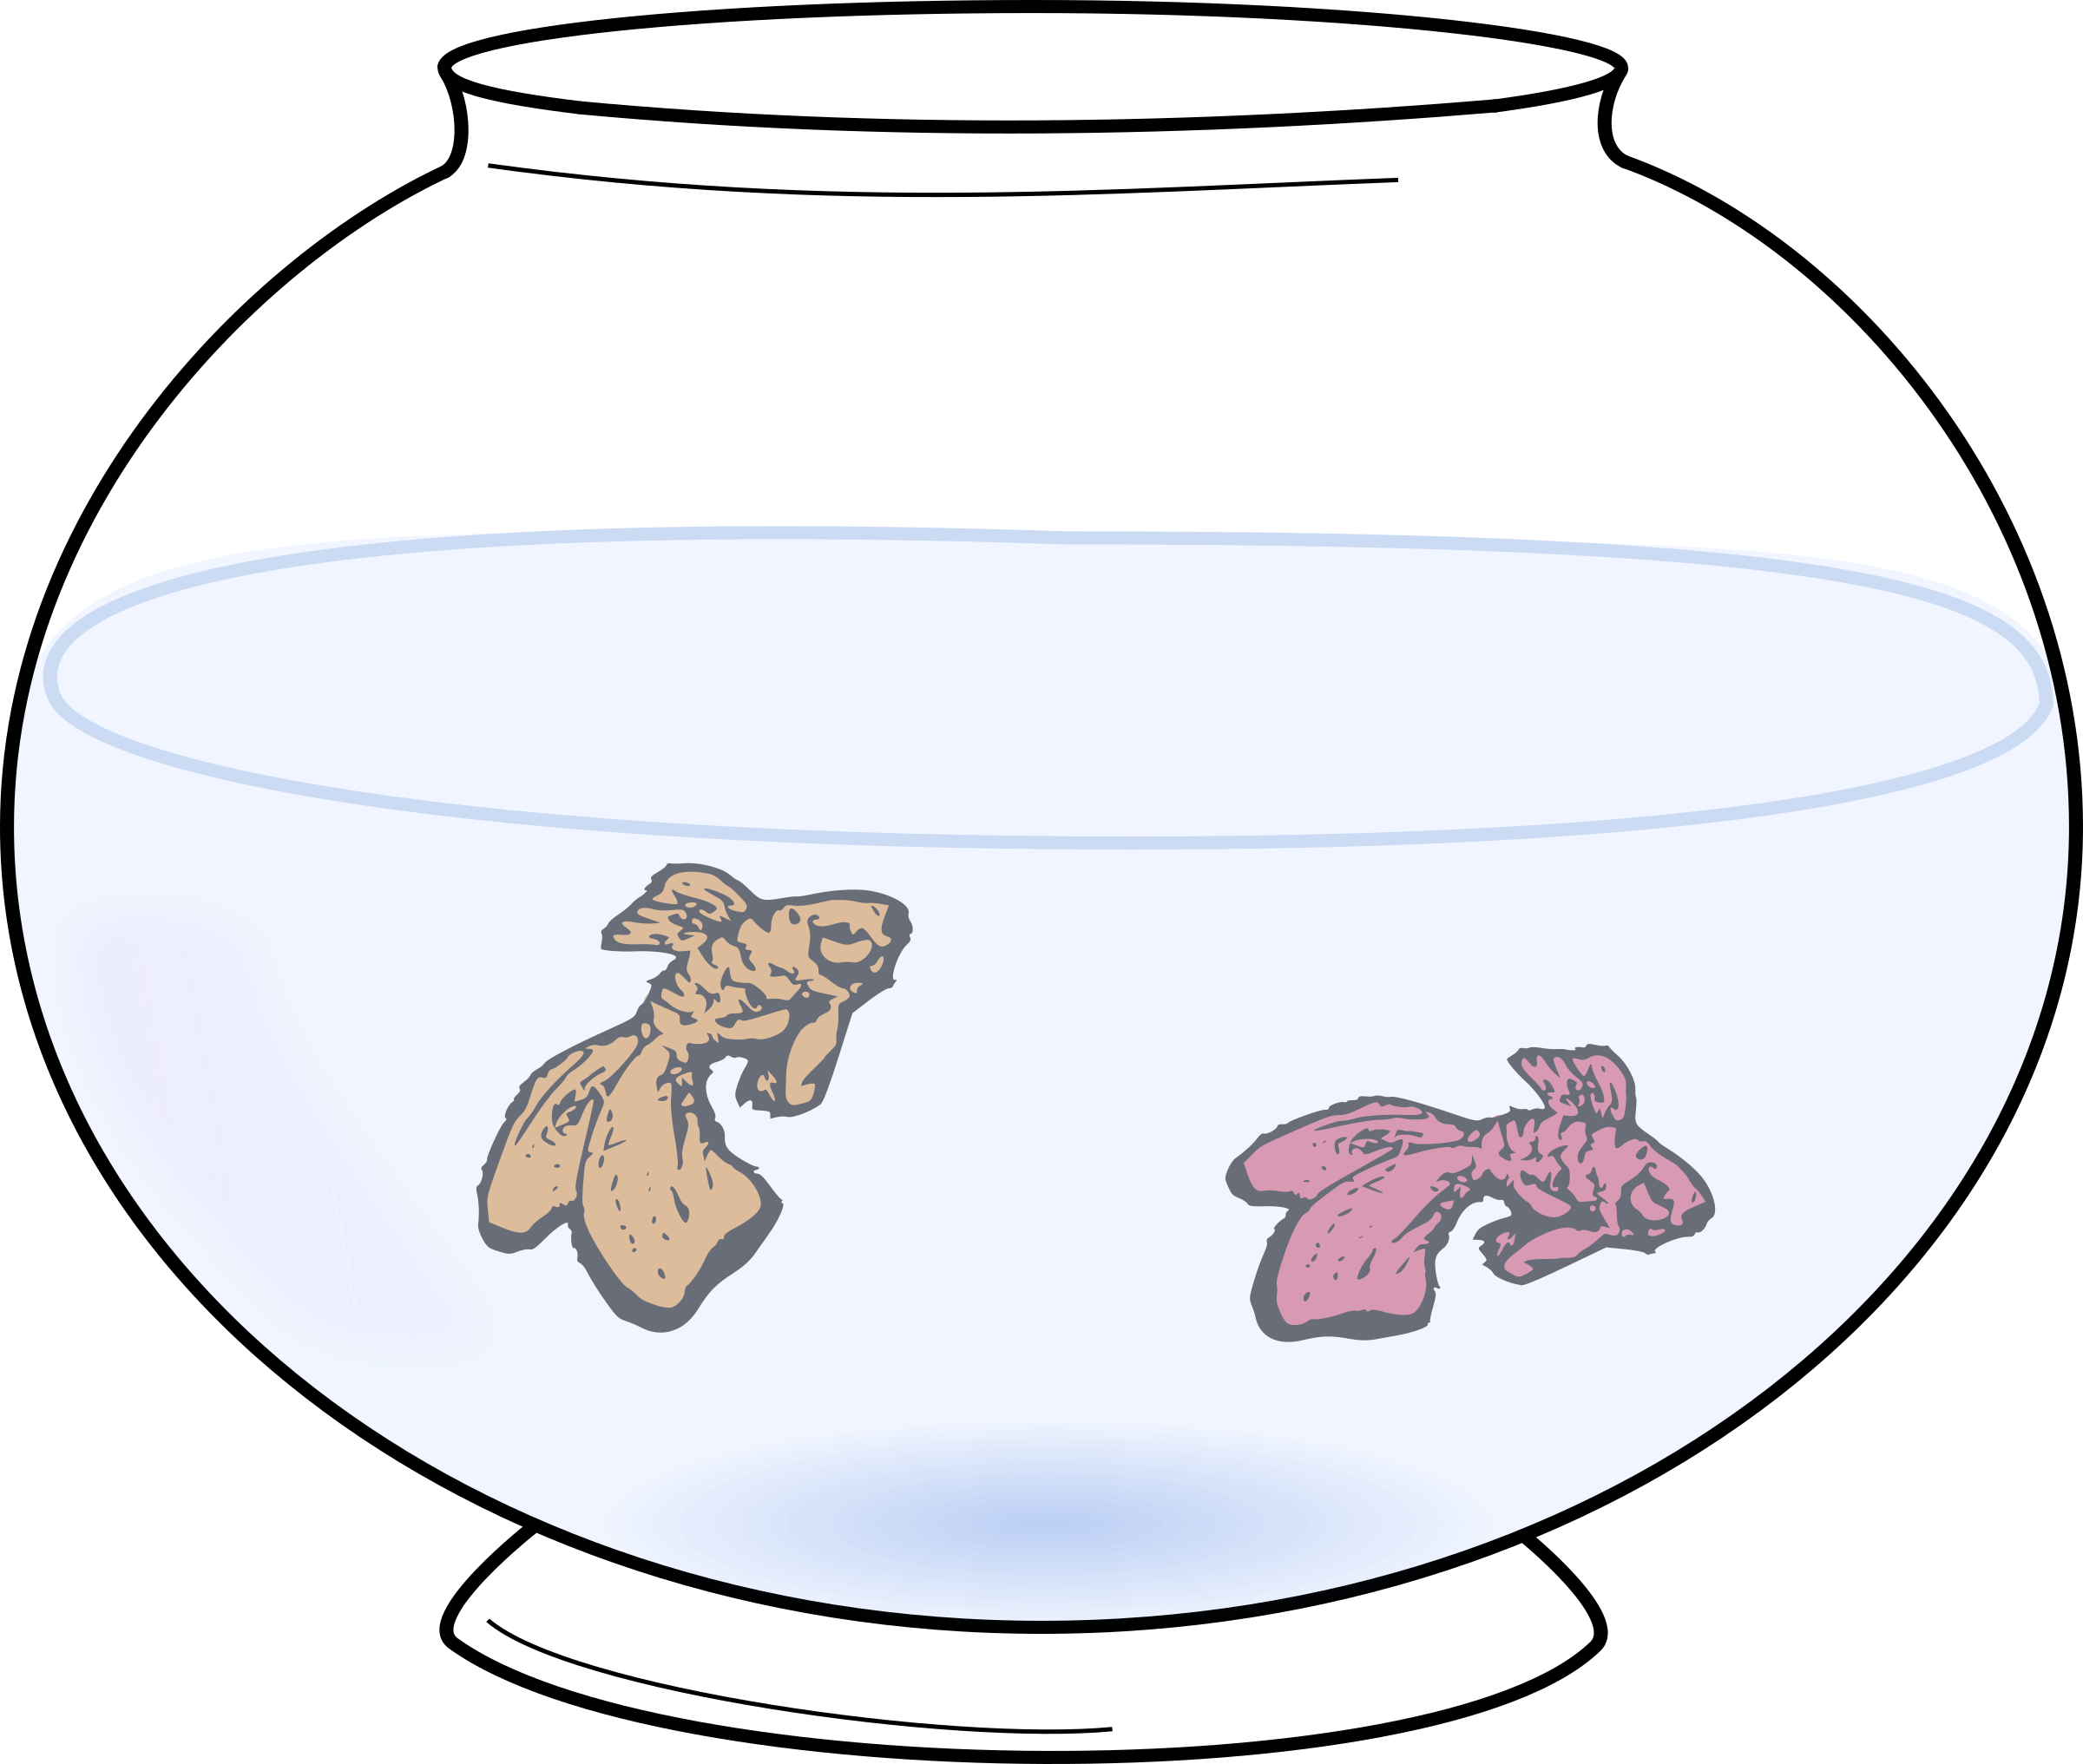 With big image png. Clipart fish bowl